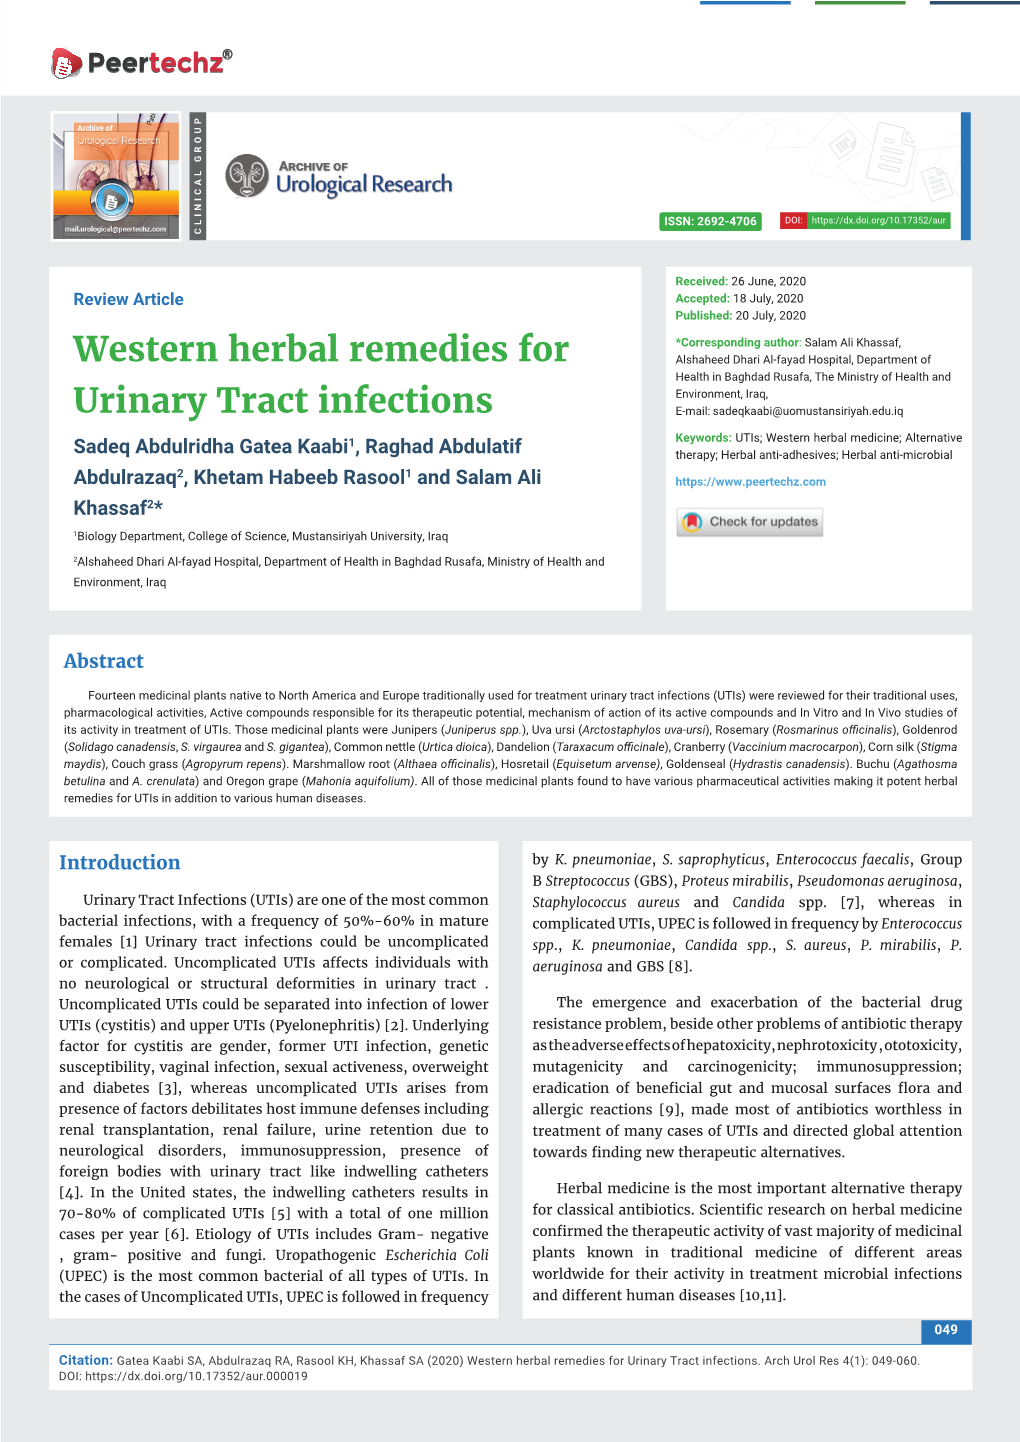 Western Herbal Remedies for Urinary Tract Infections